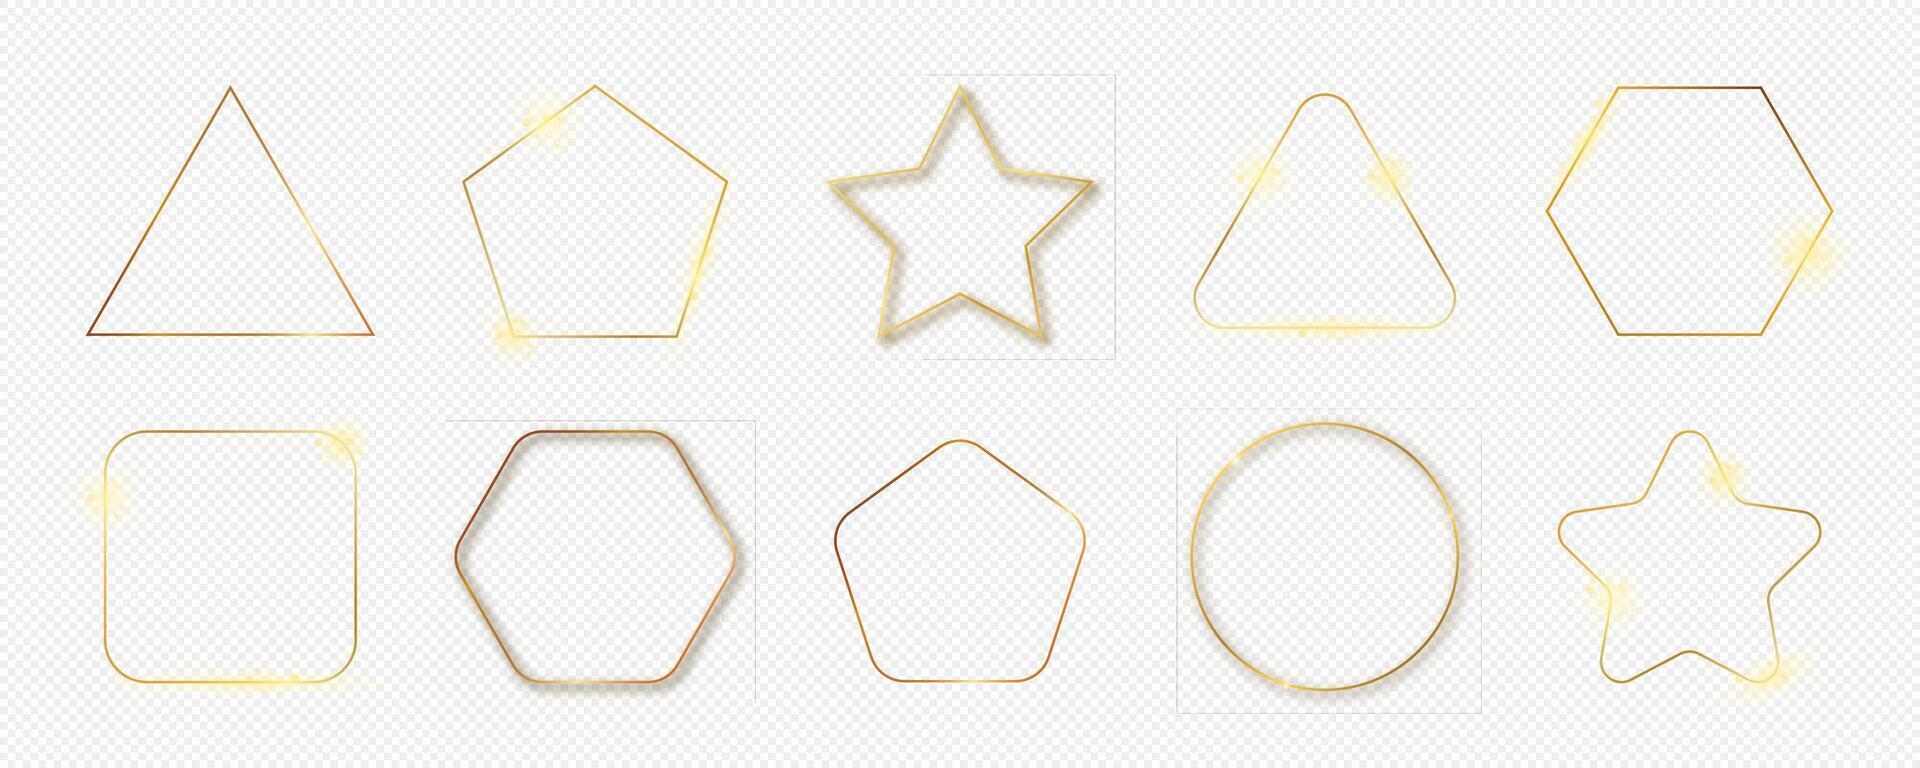 Gold glowing different geometric shape frame vector